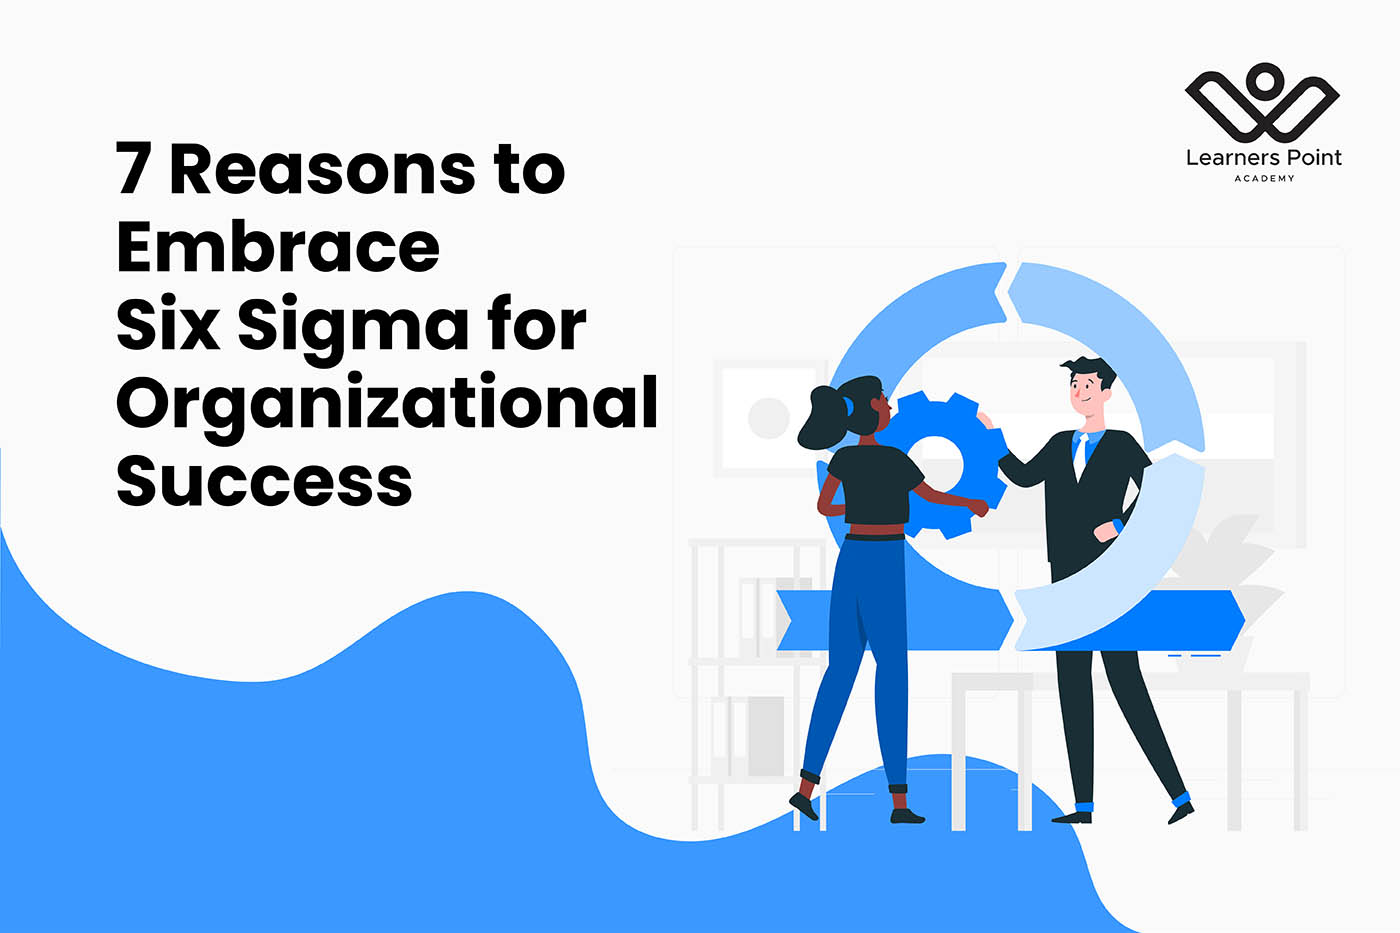 7 Reasons to Embrace Six Sigma for Organizational Success